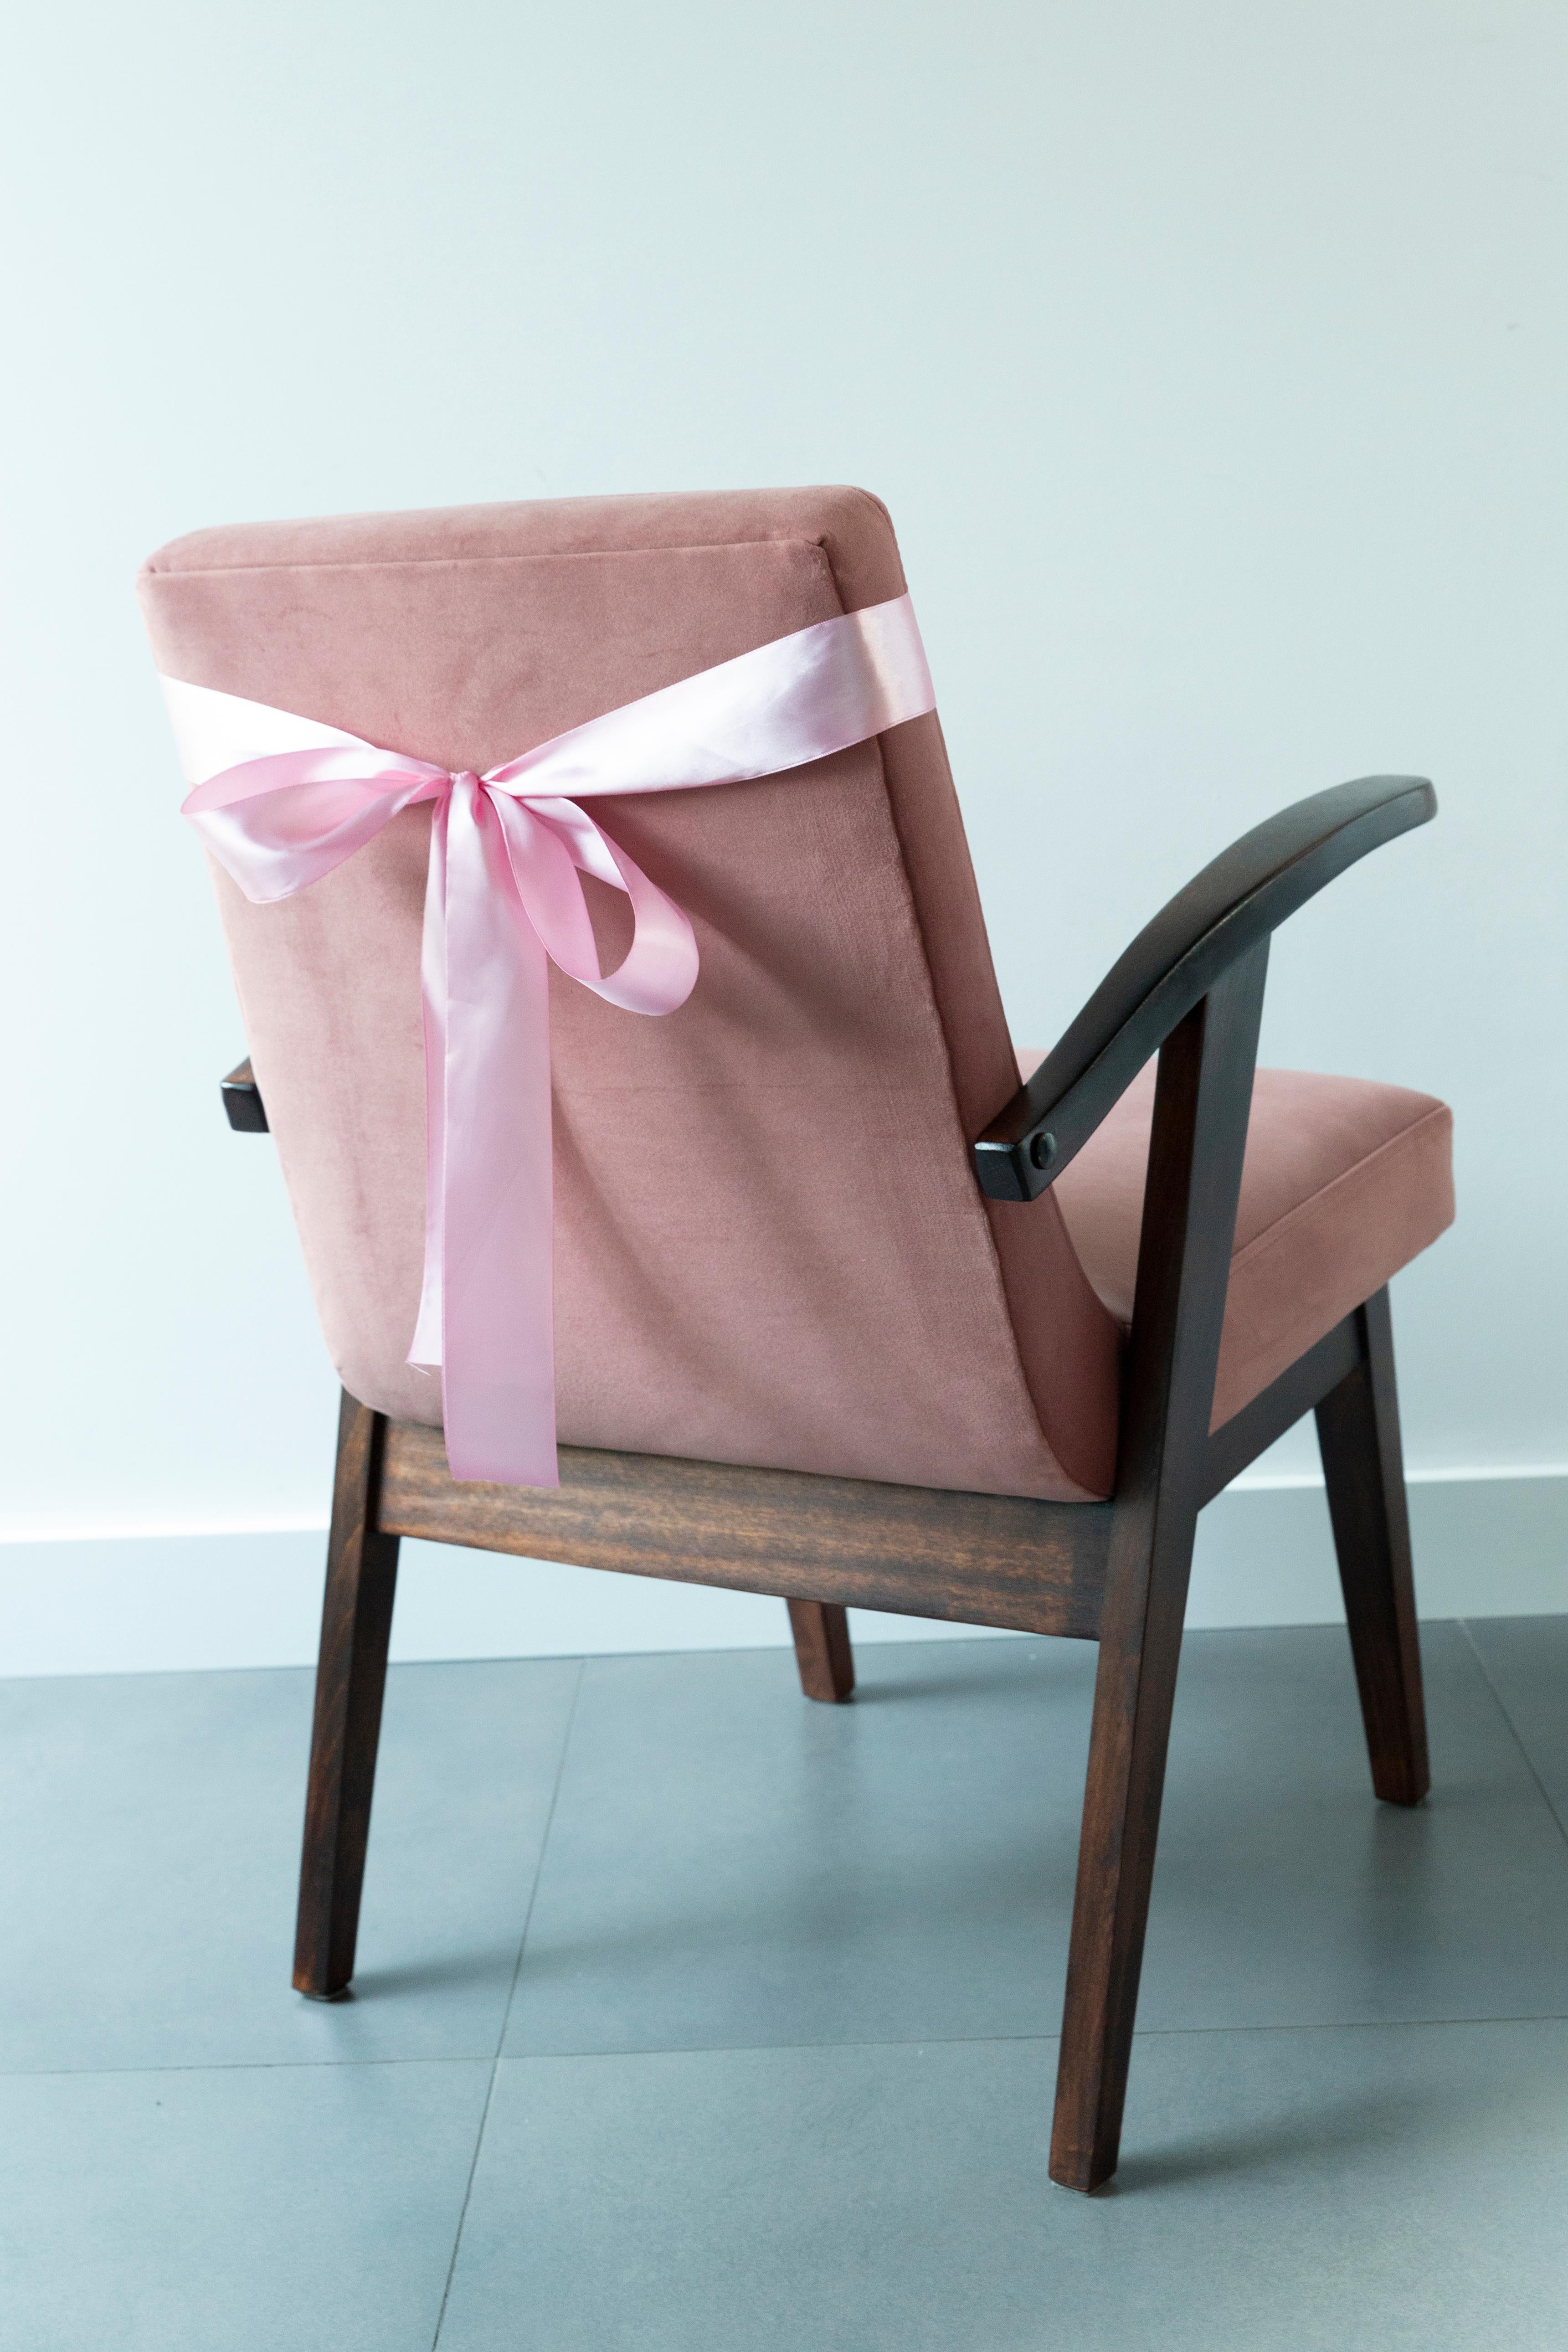 20th Century Vintage Armchair in Dusty Pink Velvet by Mieczyslaw Puchala, 1960s For Sale 6